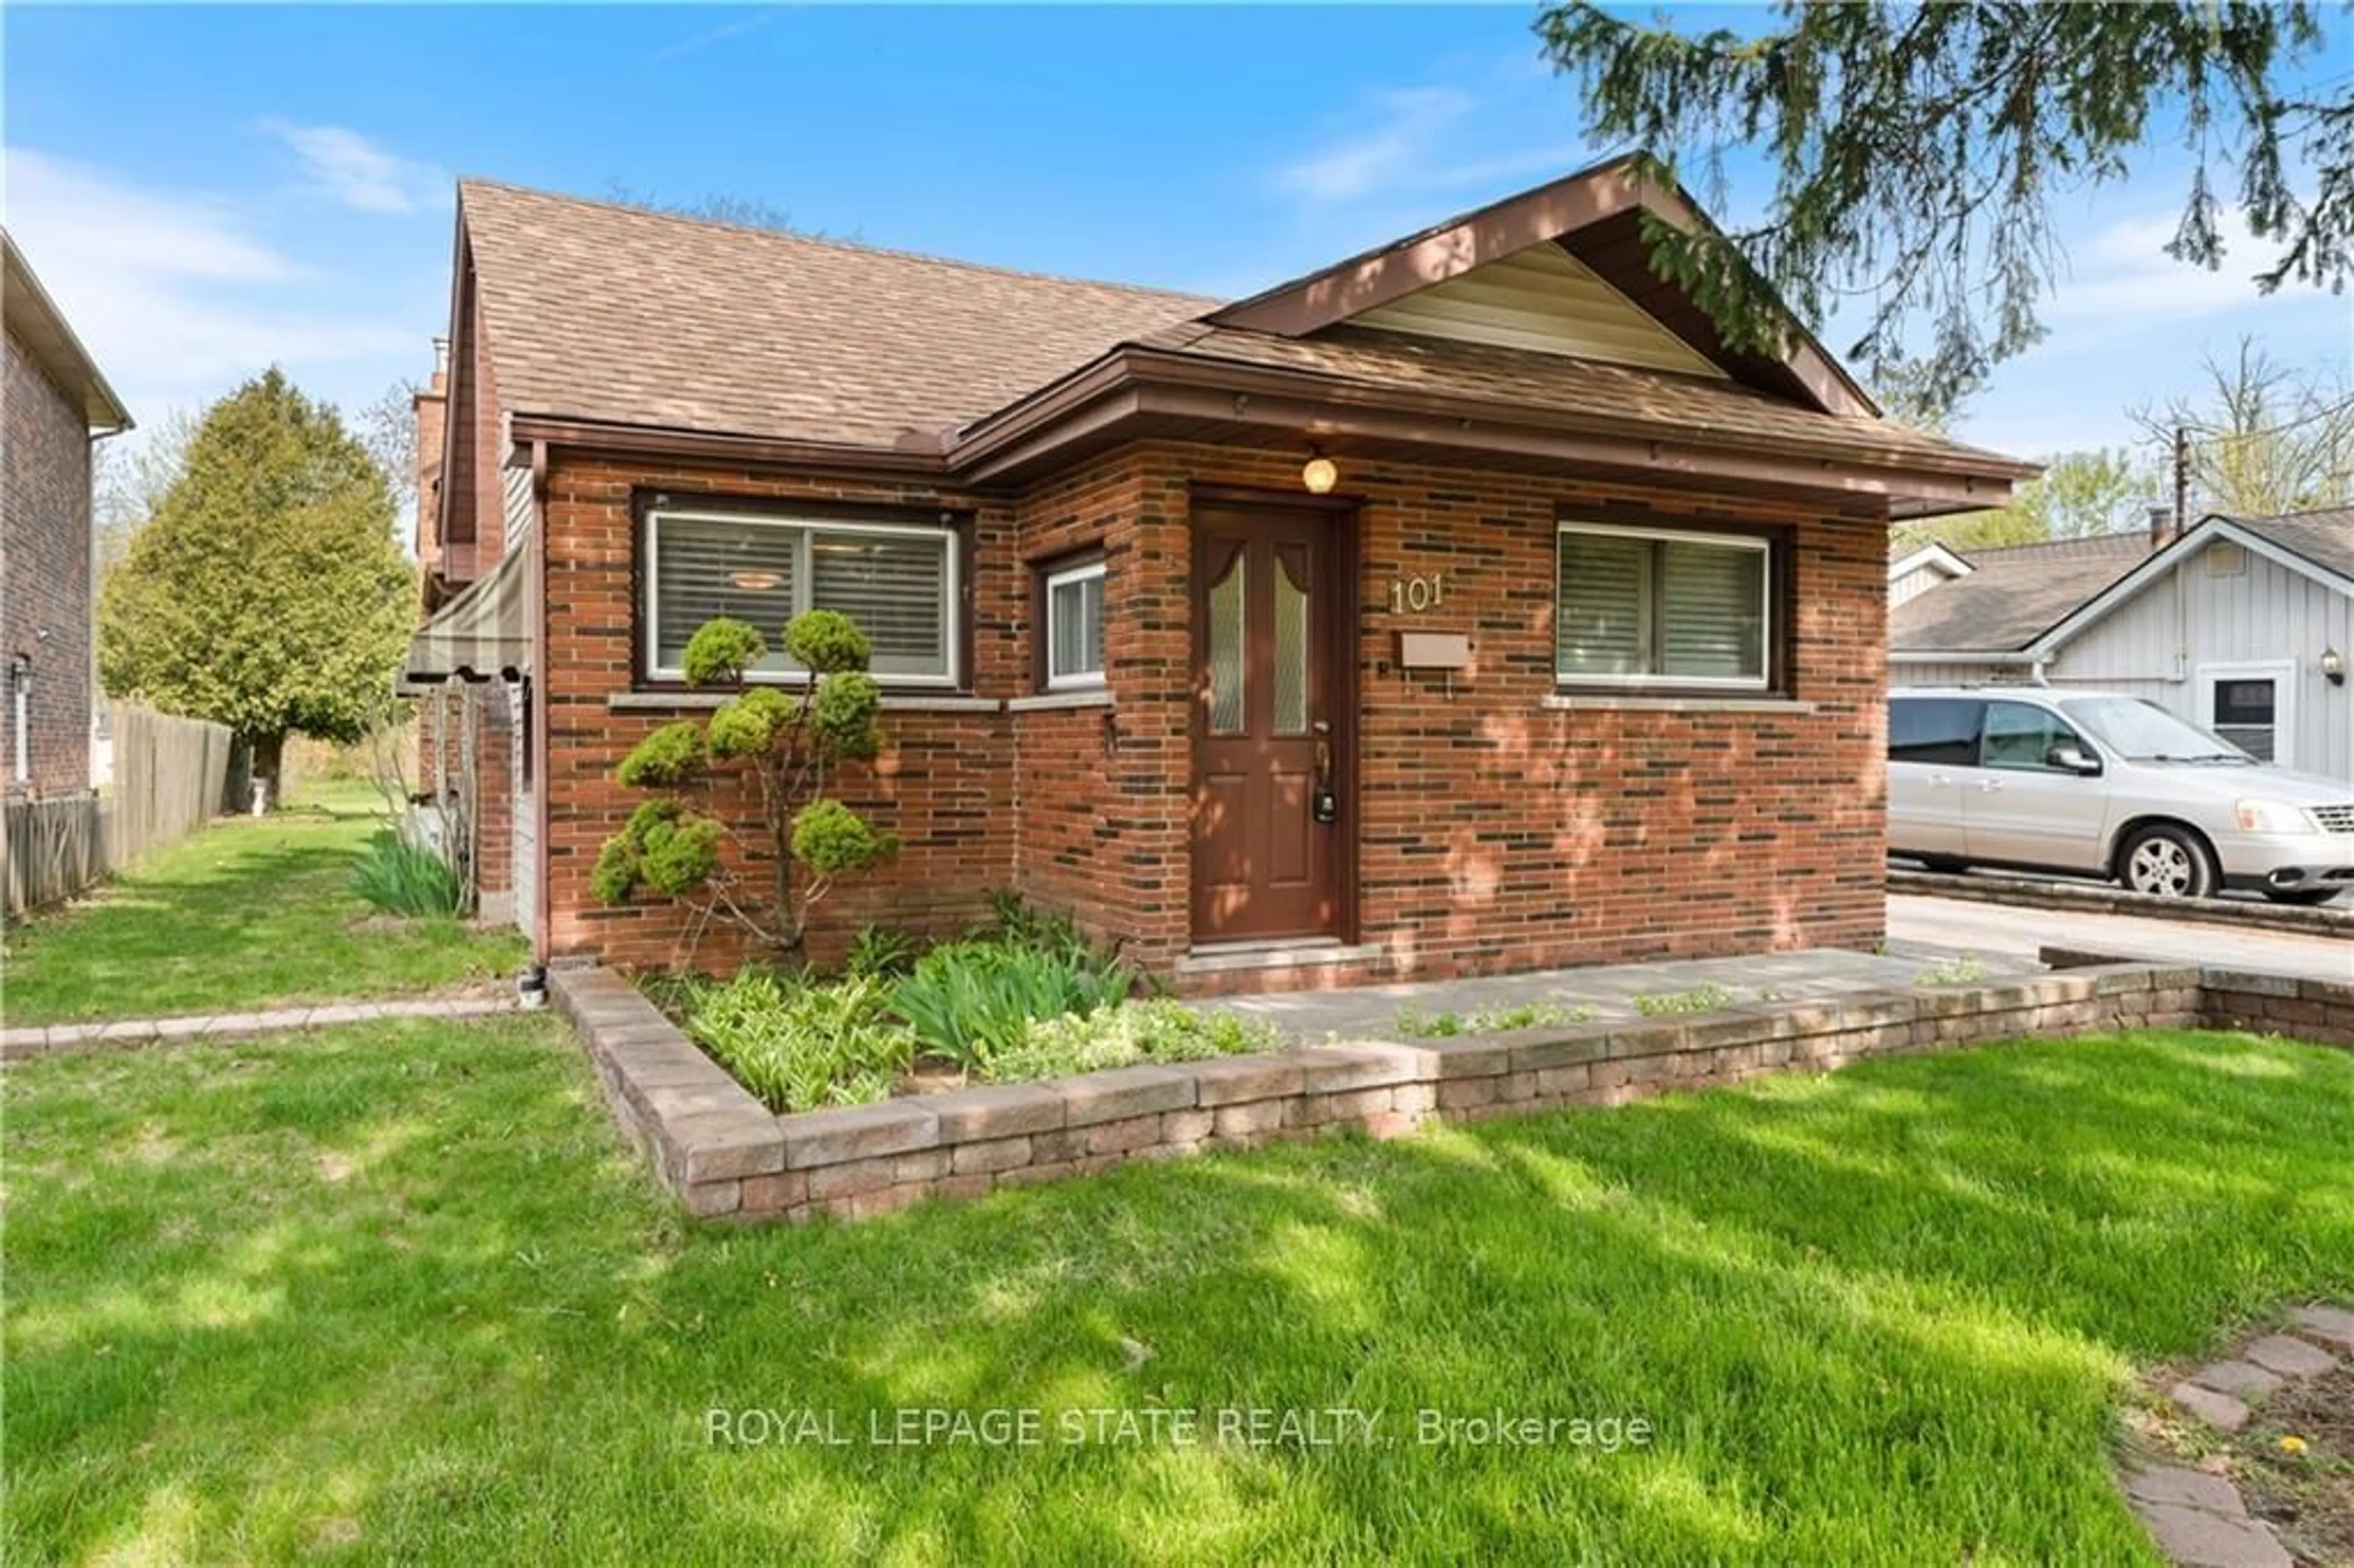 Home with brick exterior material for 101 Teal Ave, Hamilton Ontario L8E 3B5